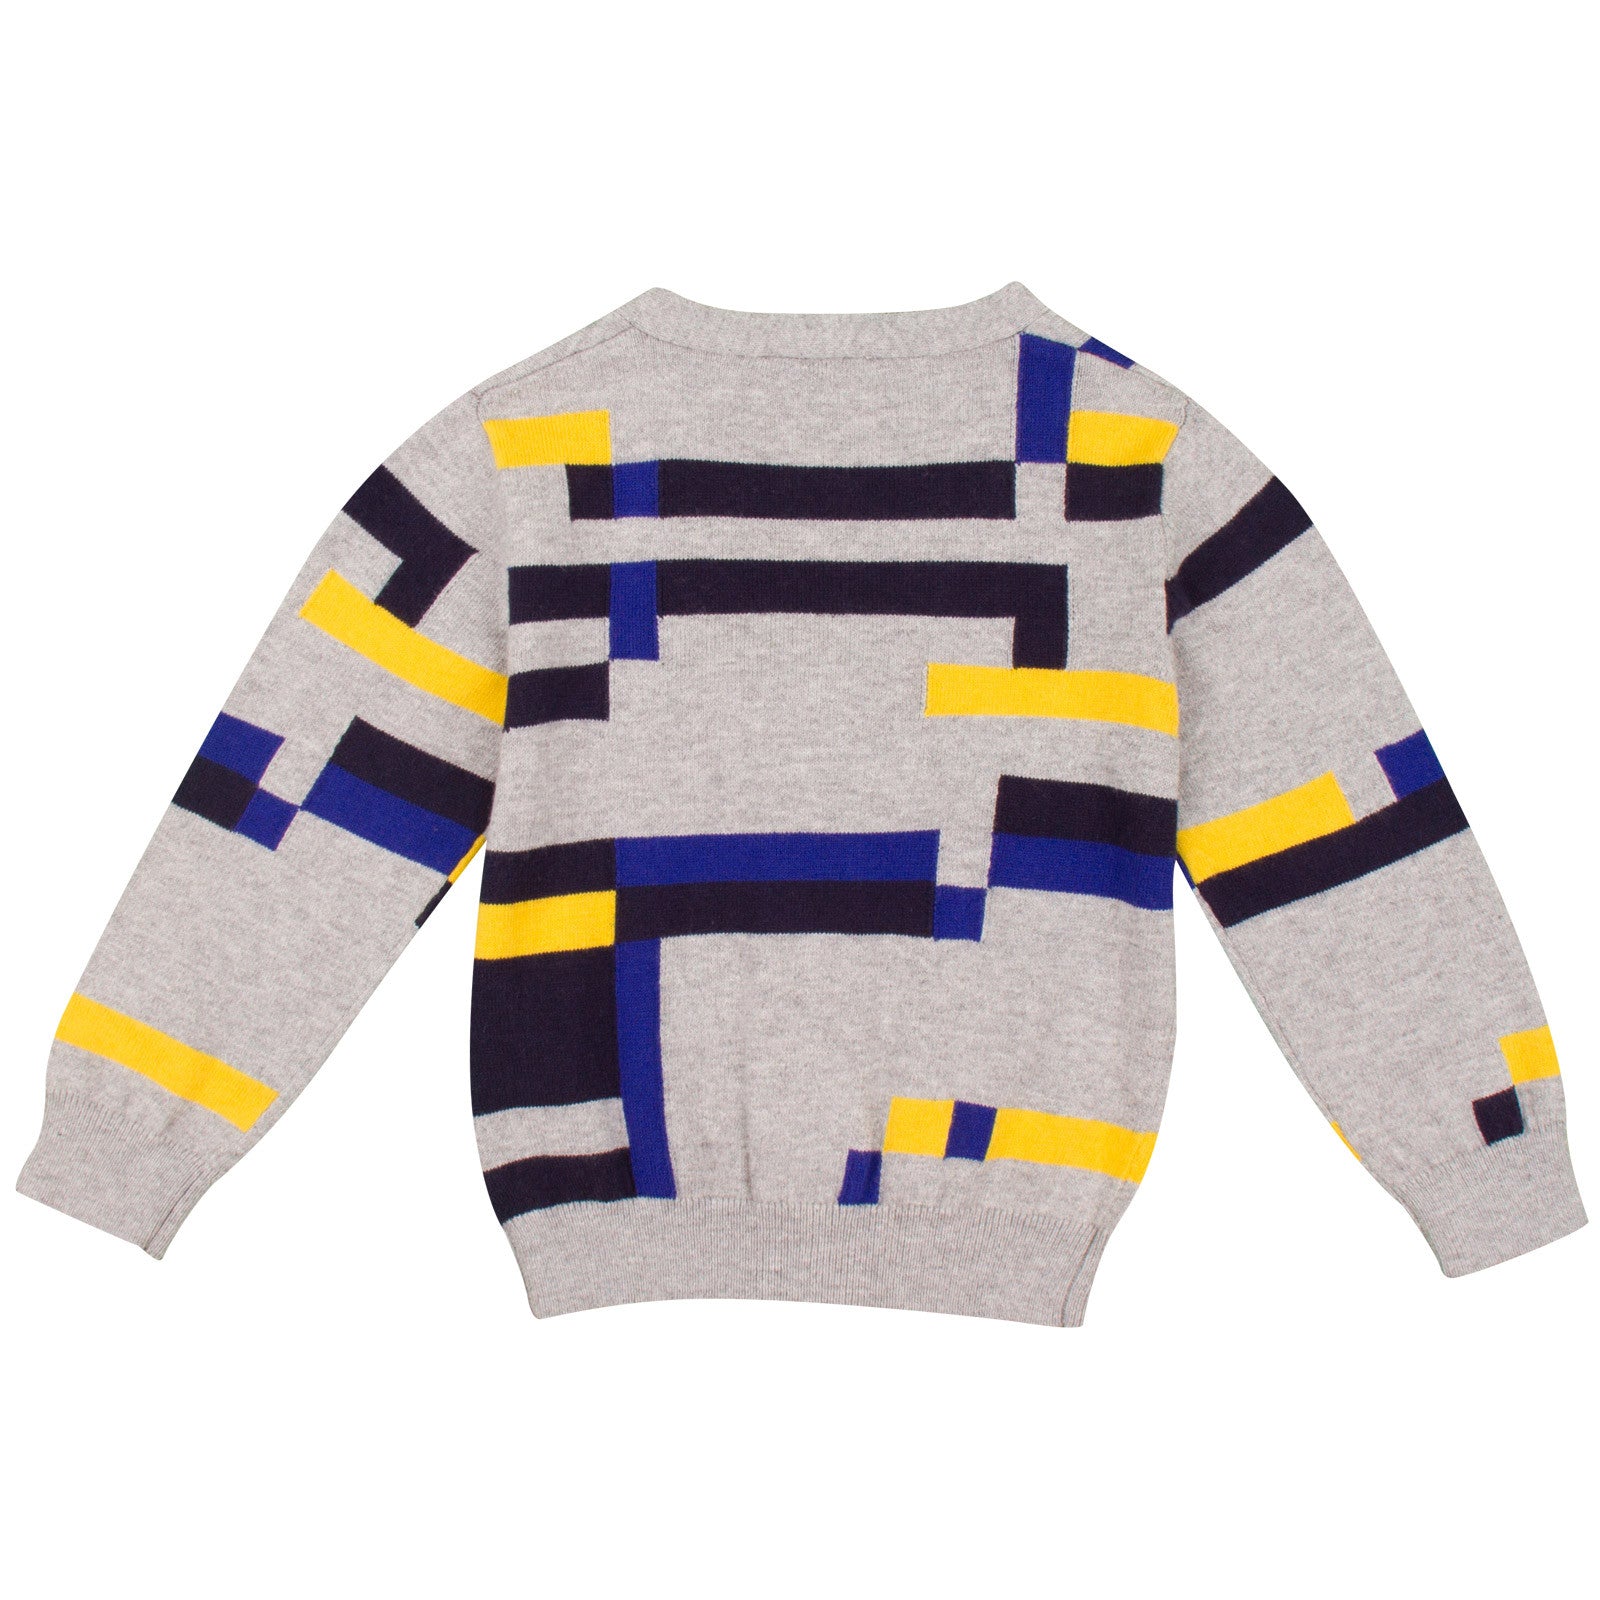 Baby Boys Grey Colour Block Knitted Cardigan - CÉMAROSE | Children's Fashion Store - 2